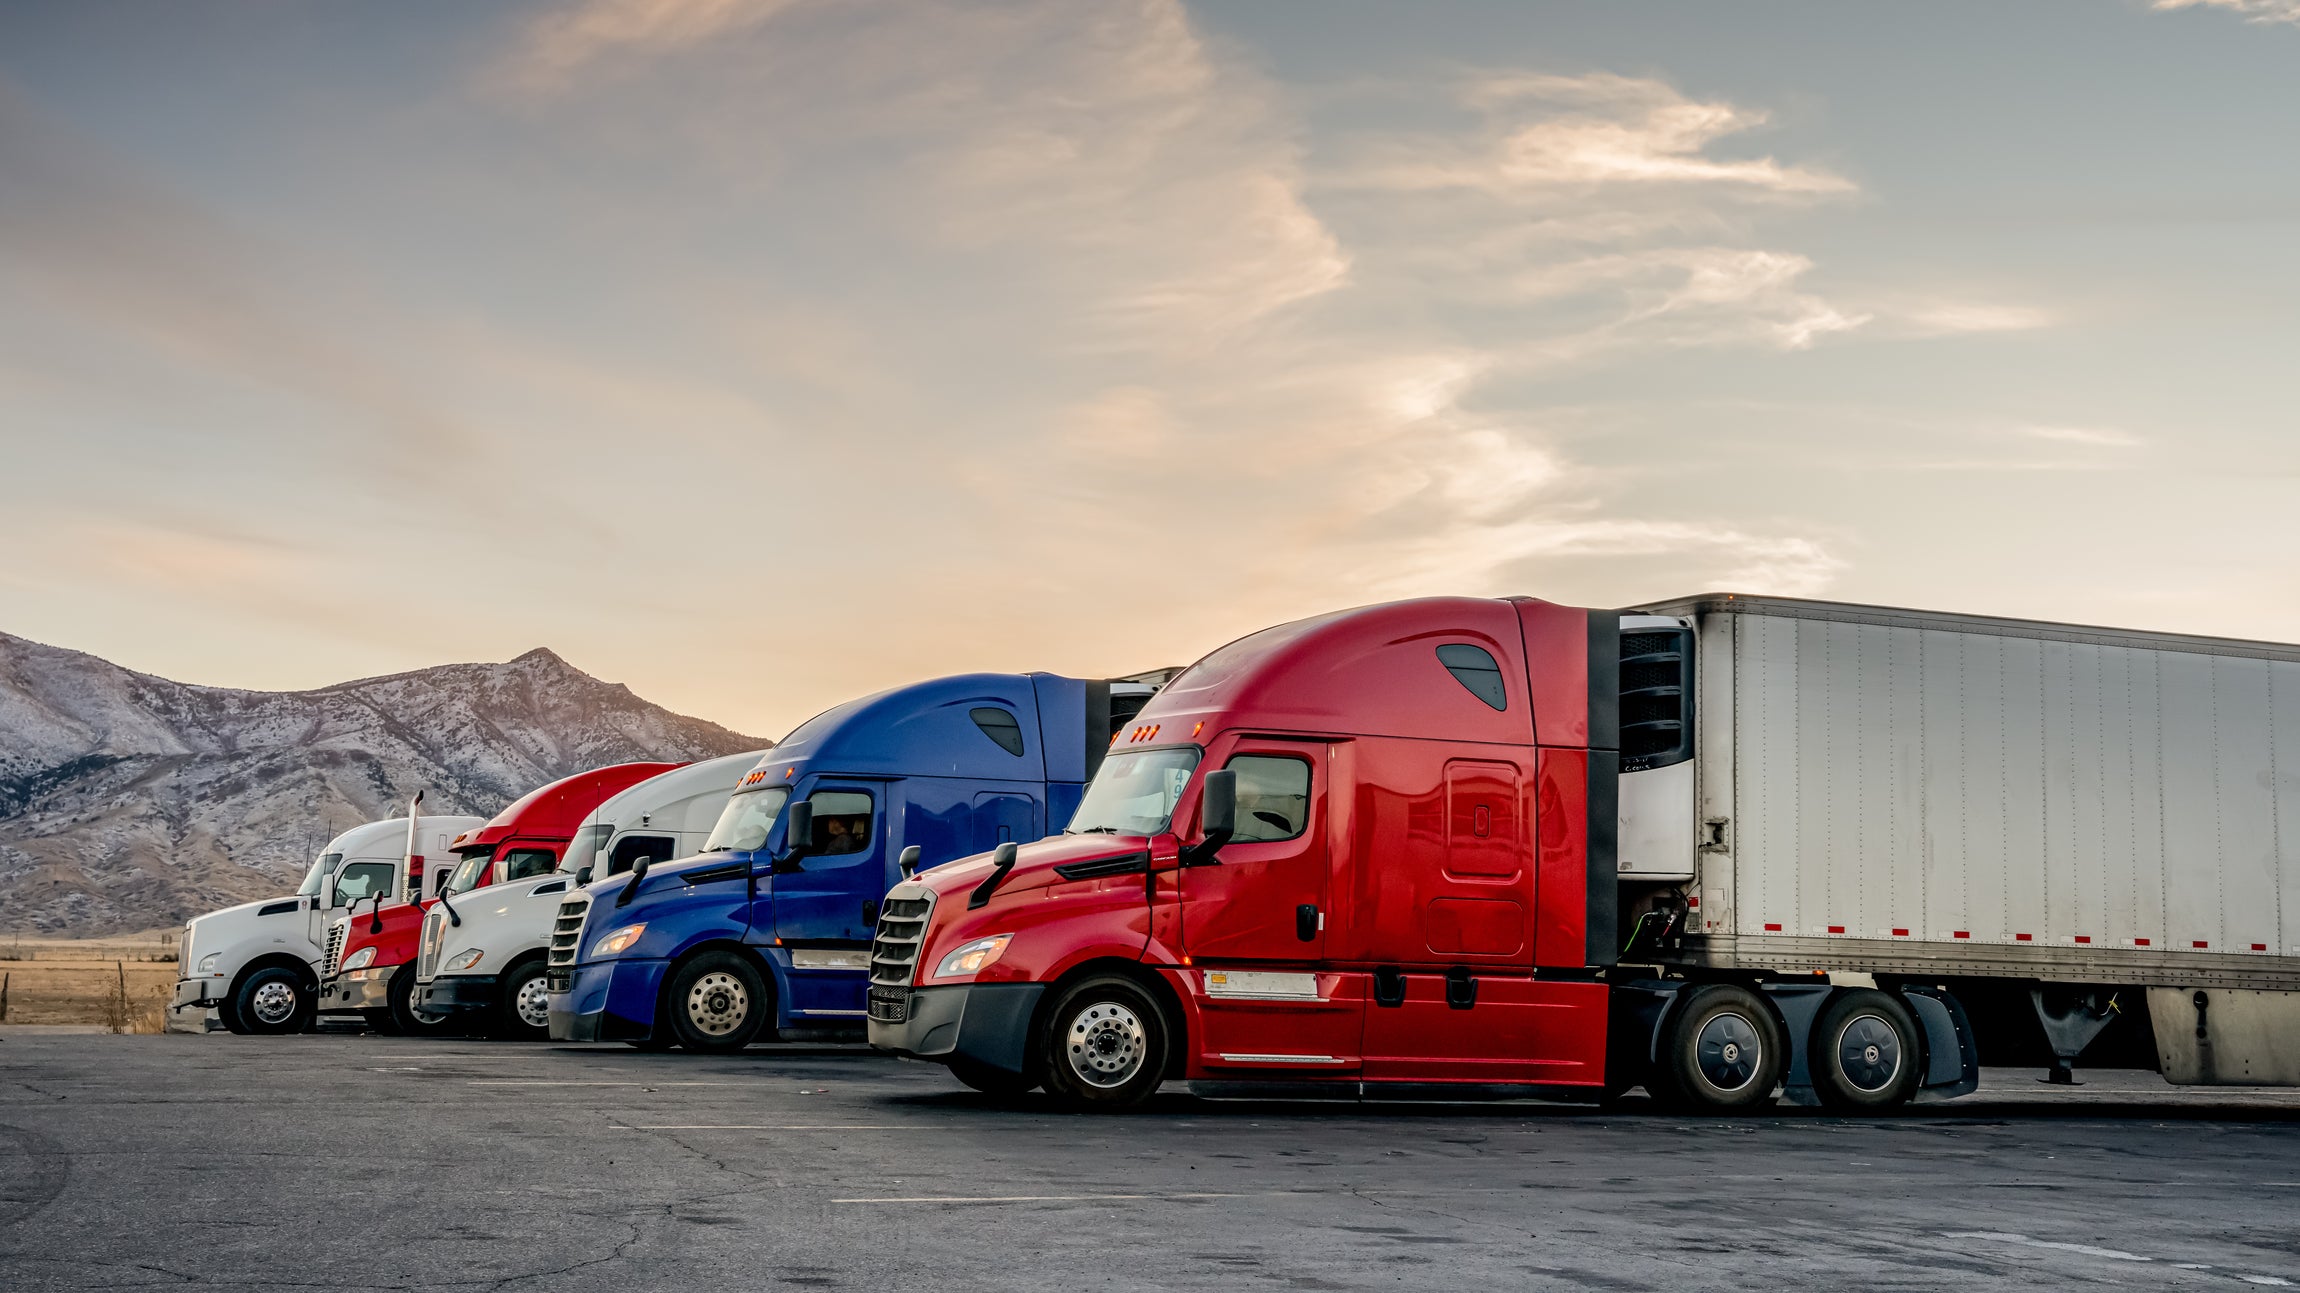 5 Facts You Need to Know About Haulage Companies